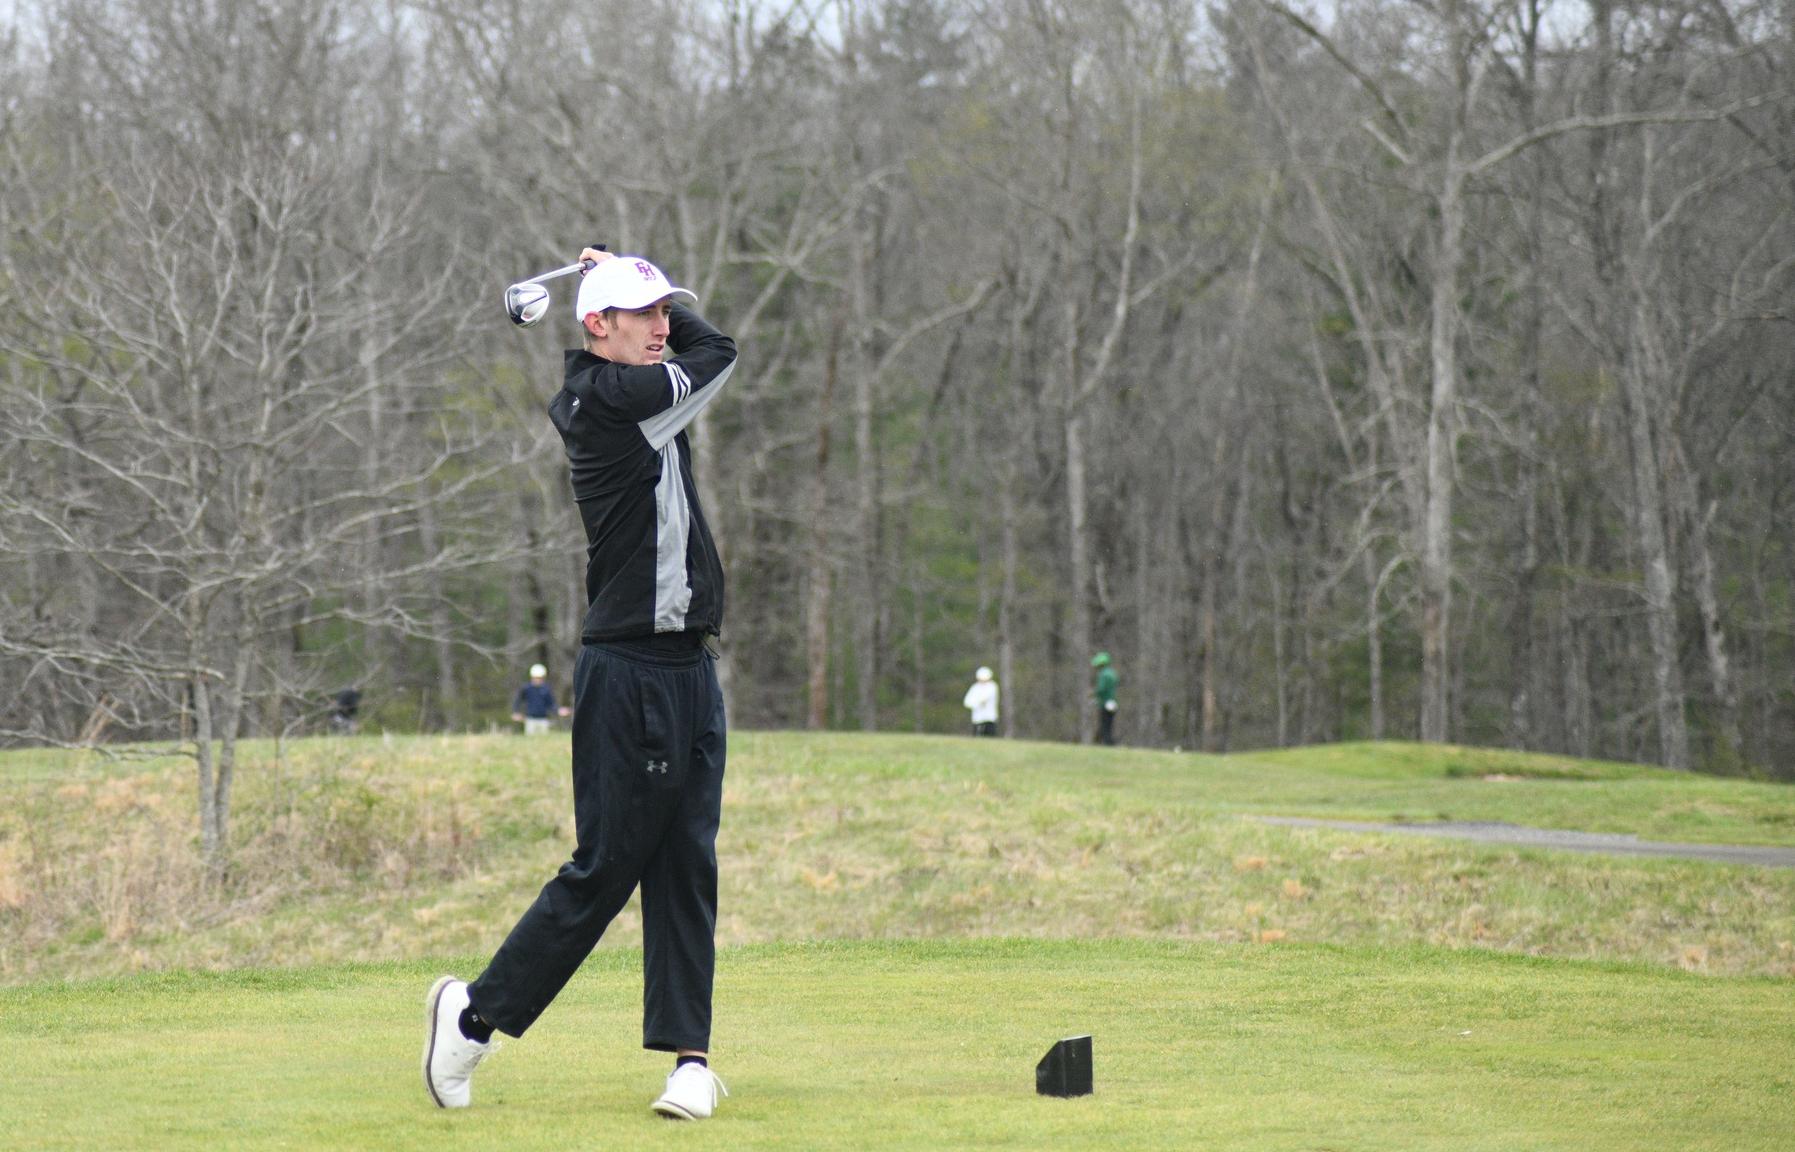 Lions finish 10th in MSC Spring Preview